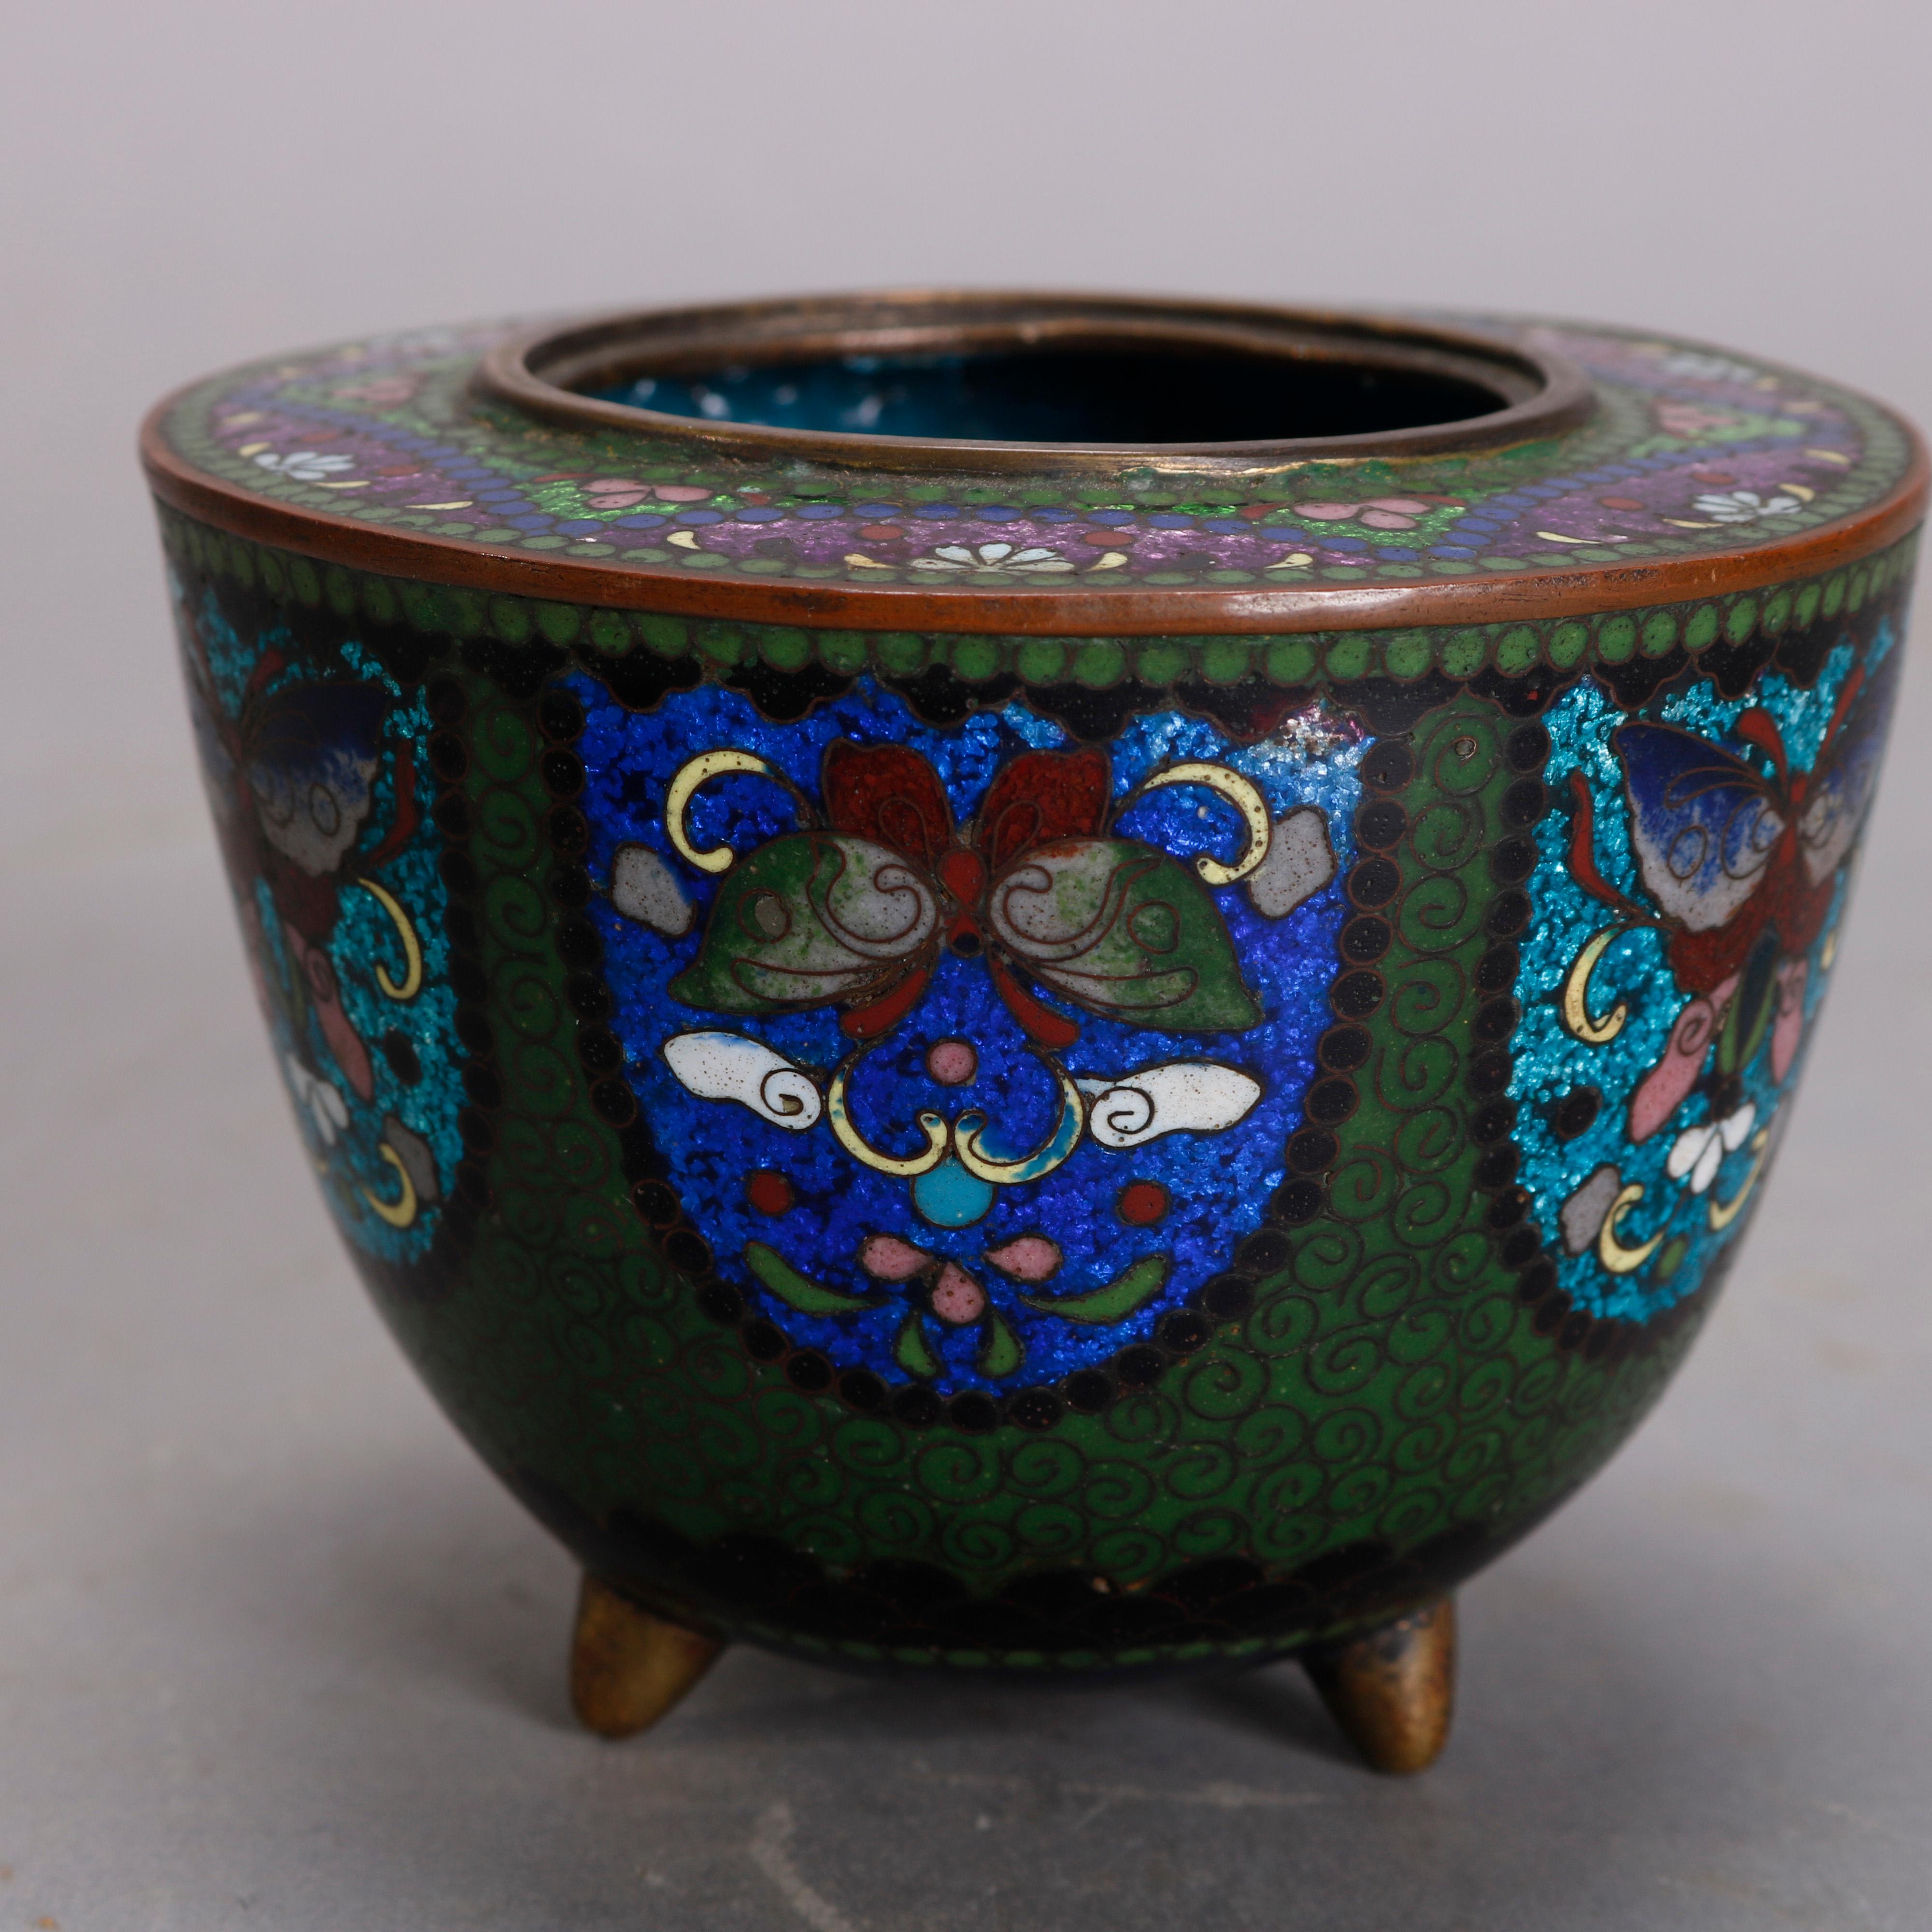 20th Century Antique Chinese Butterfly Cloisonne Enameled Lidded Server, circa 1900